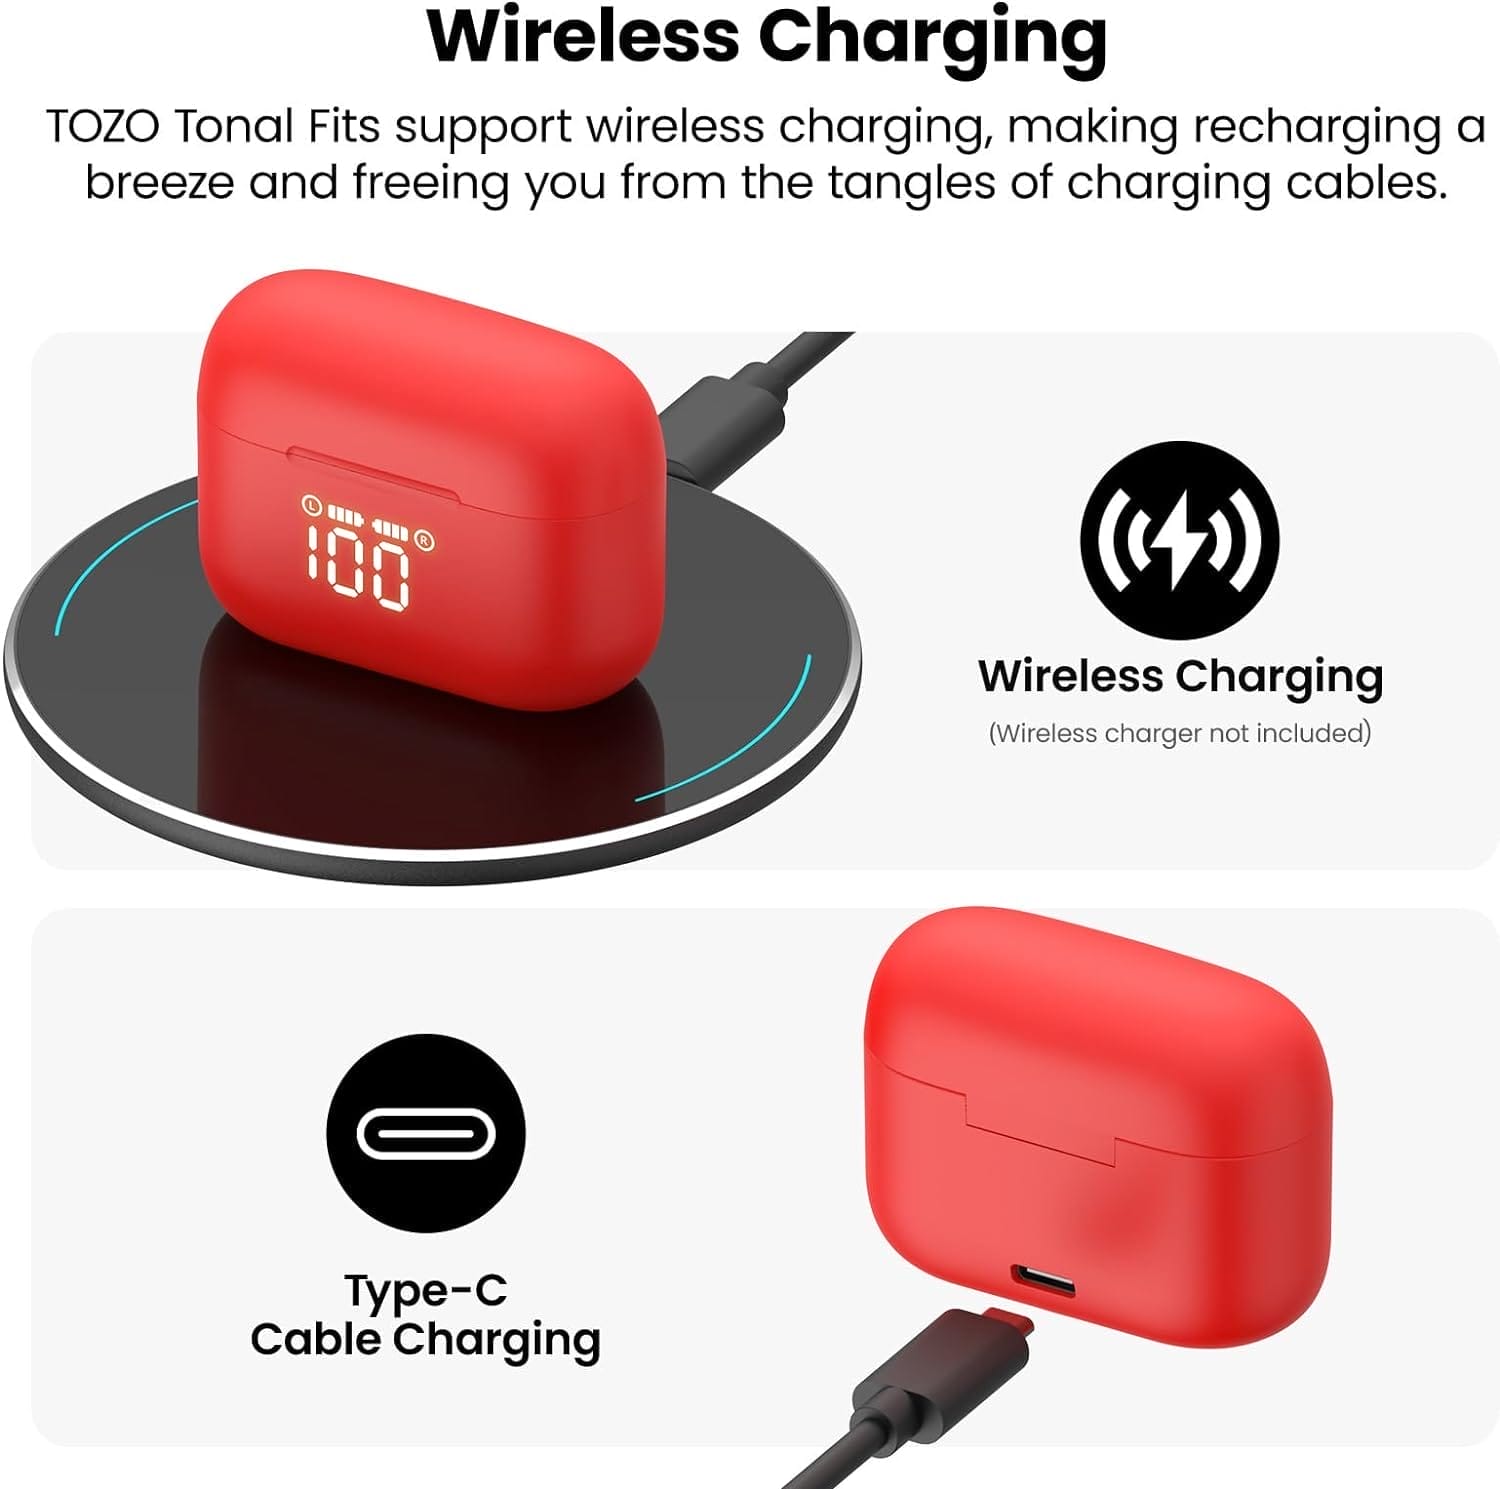 Image shows the way you can charge the TOZO Tonal Fits T21.